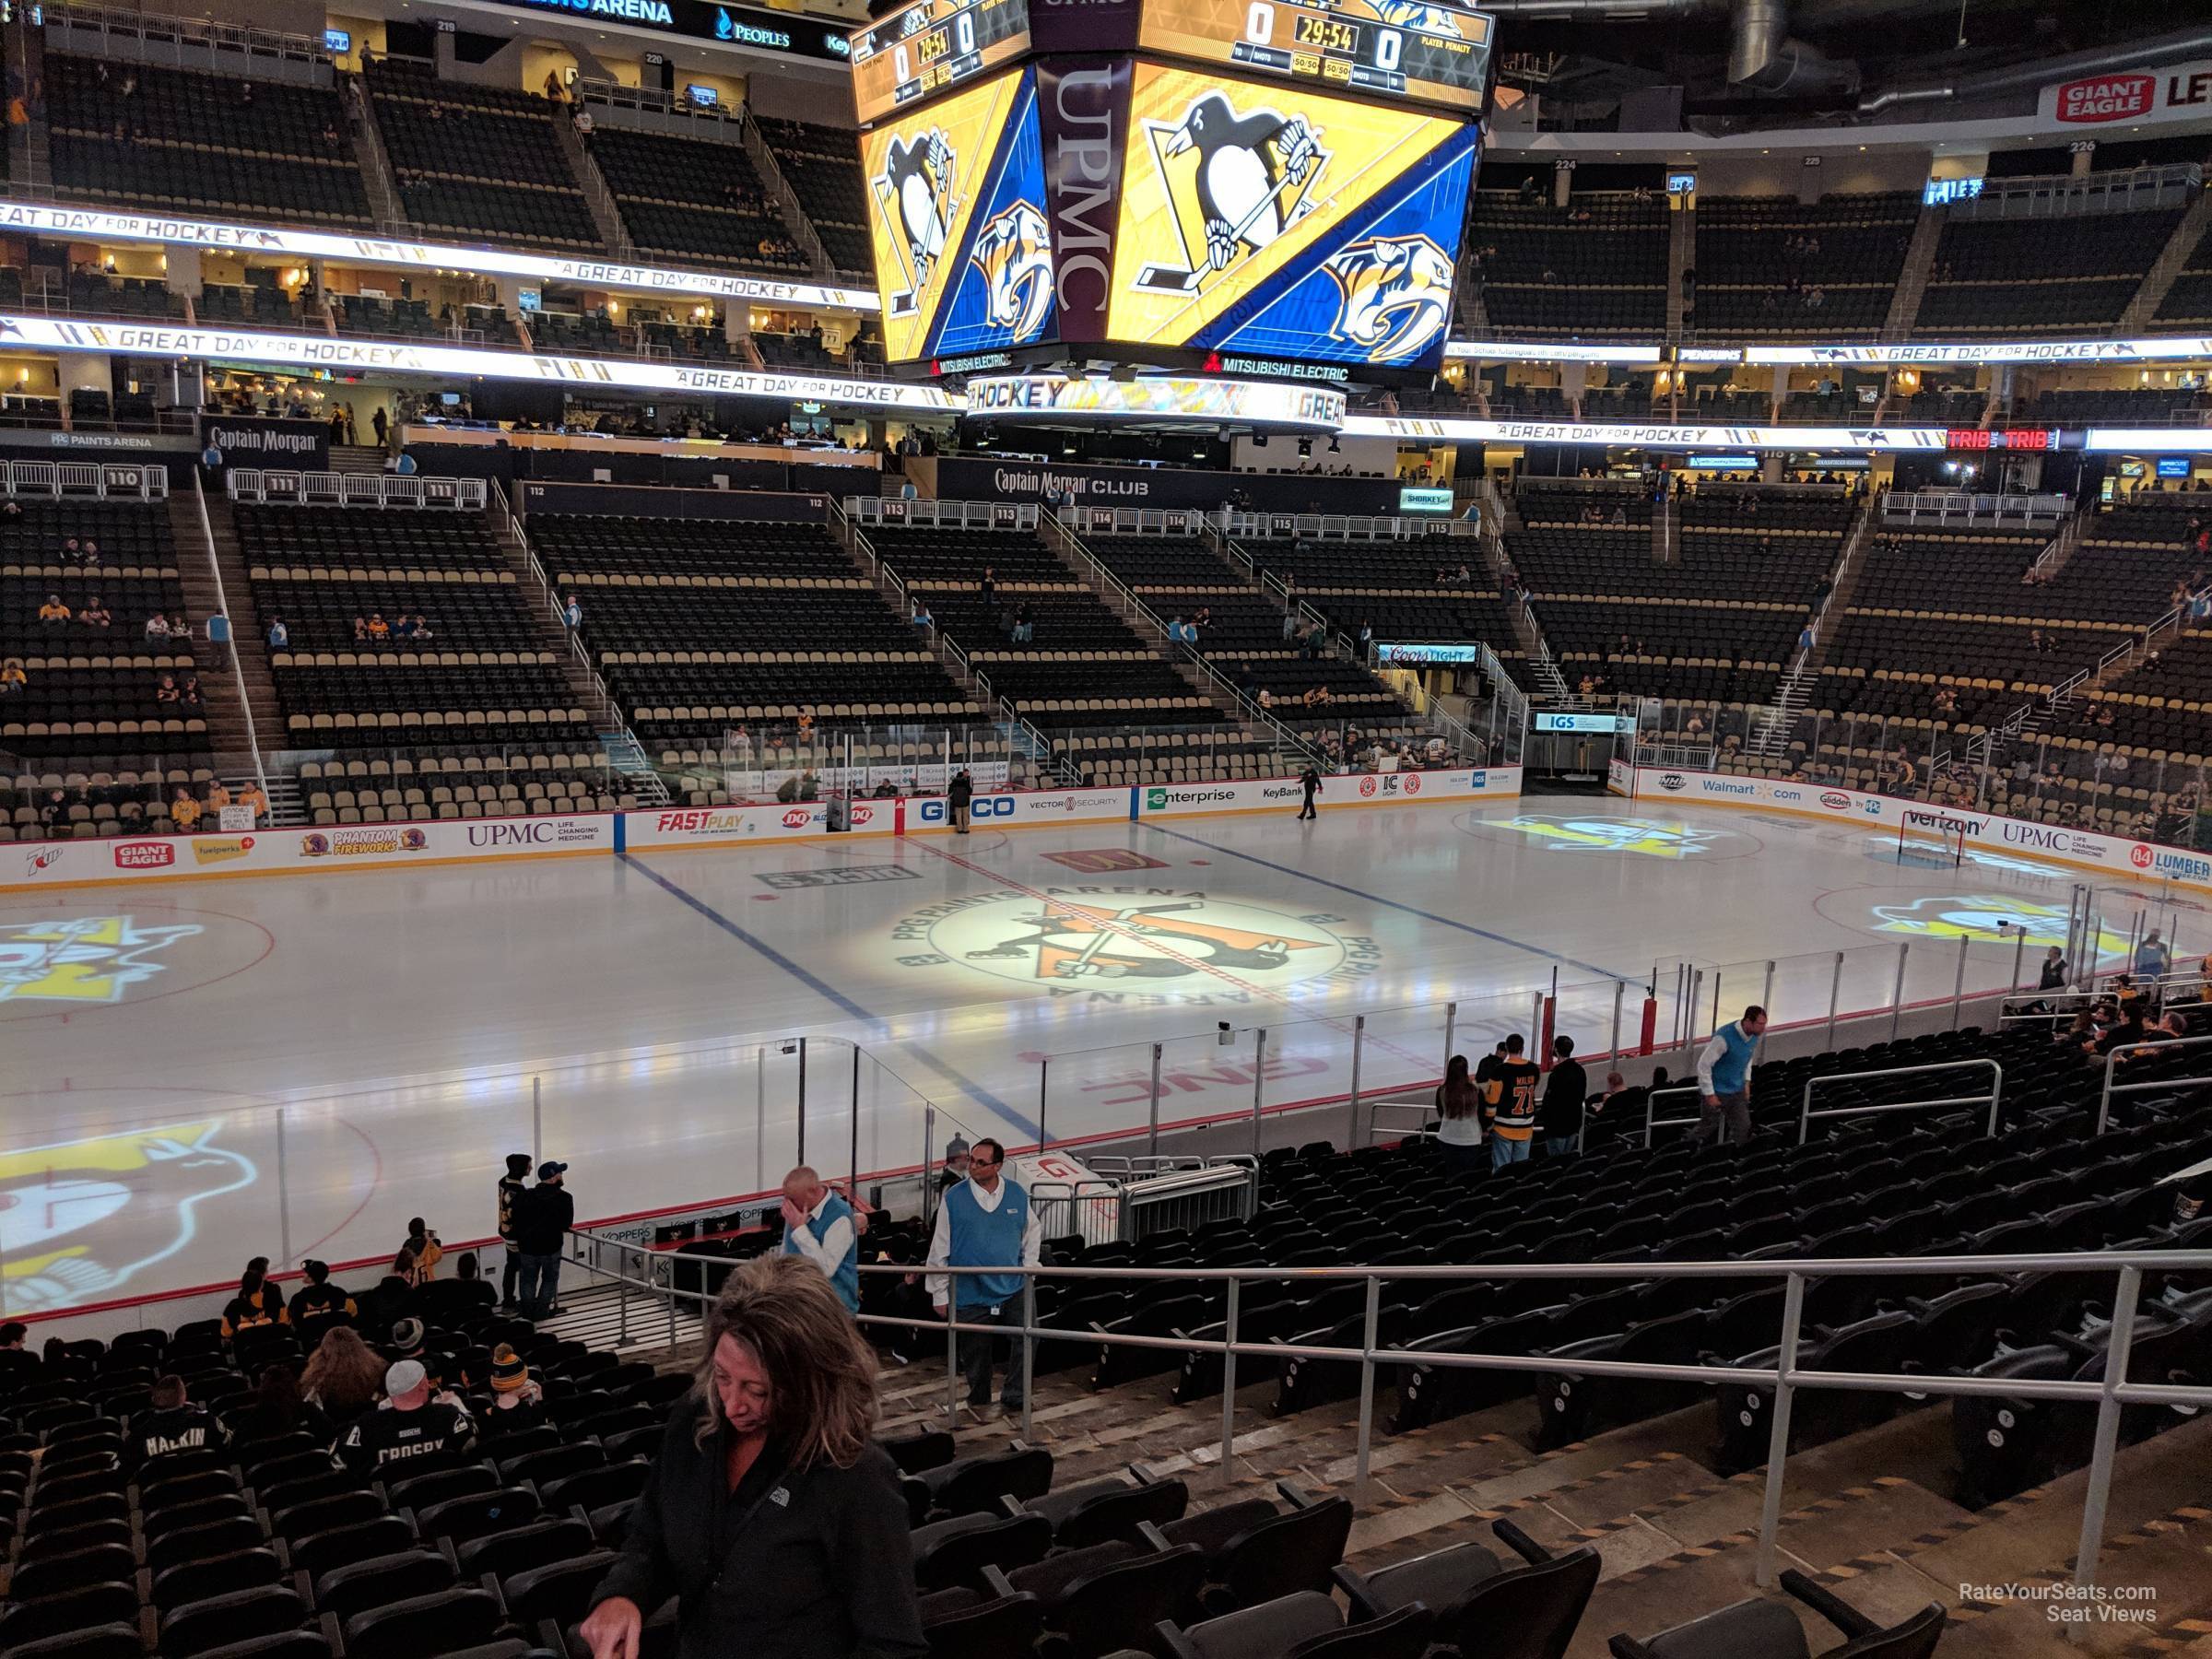 Section 108 at PPG Paints Arena 